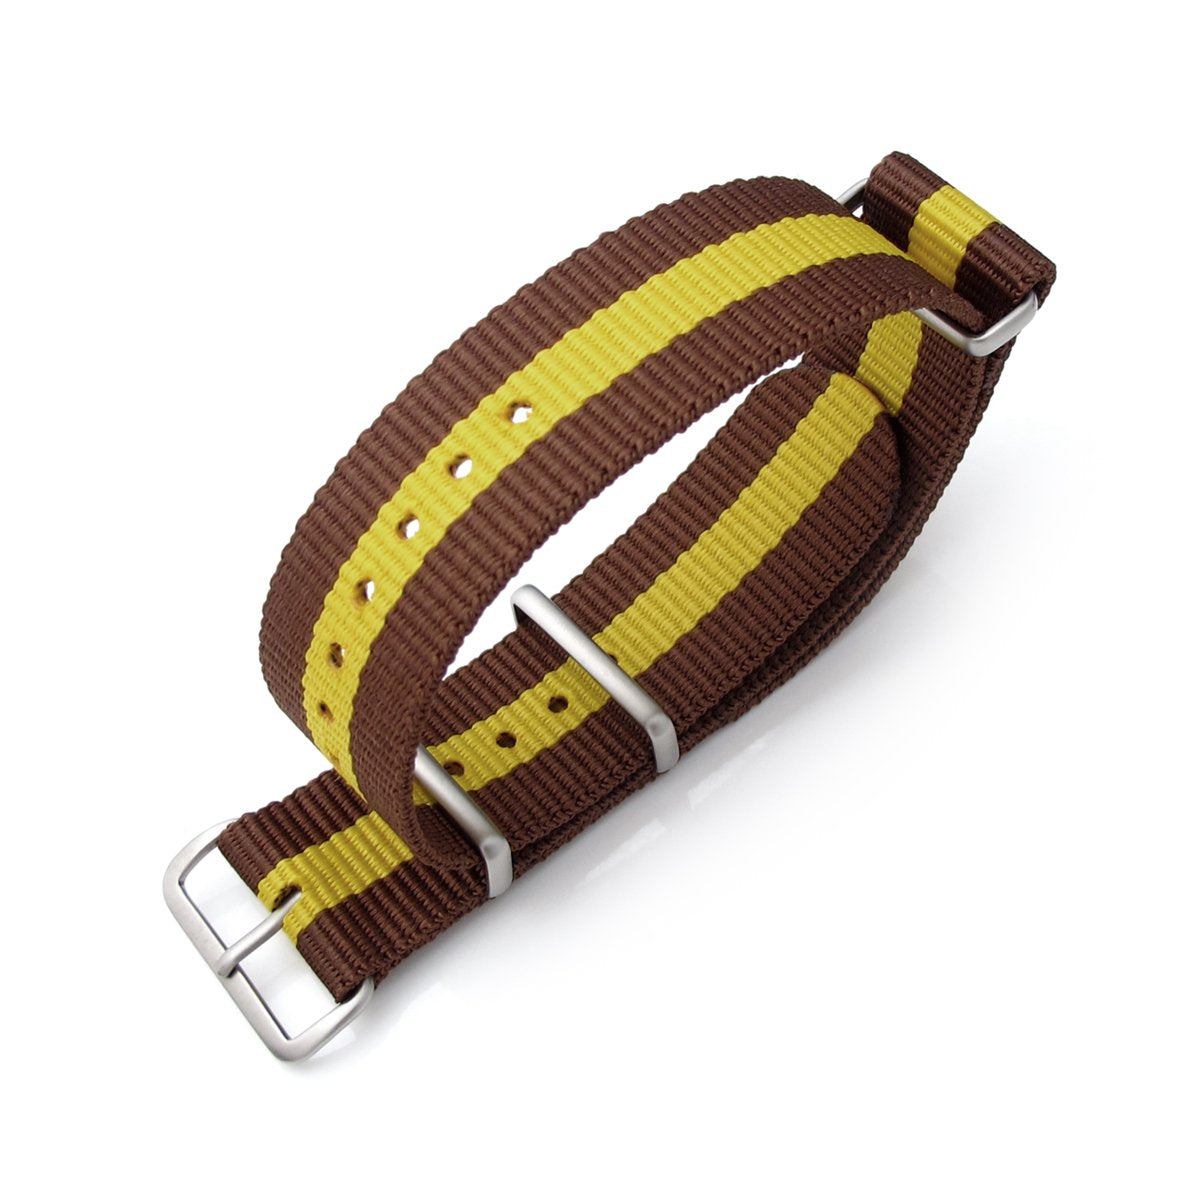 MiLTAT 20mm 22mm or 24mm G10 NATO Military Watch Strap Ballistic Nylon Armband Brushed Brown & Yellow Strapcode Watch Bands